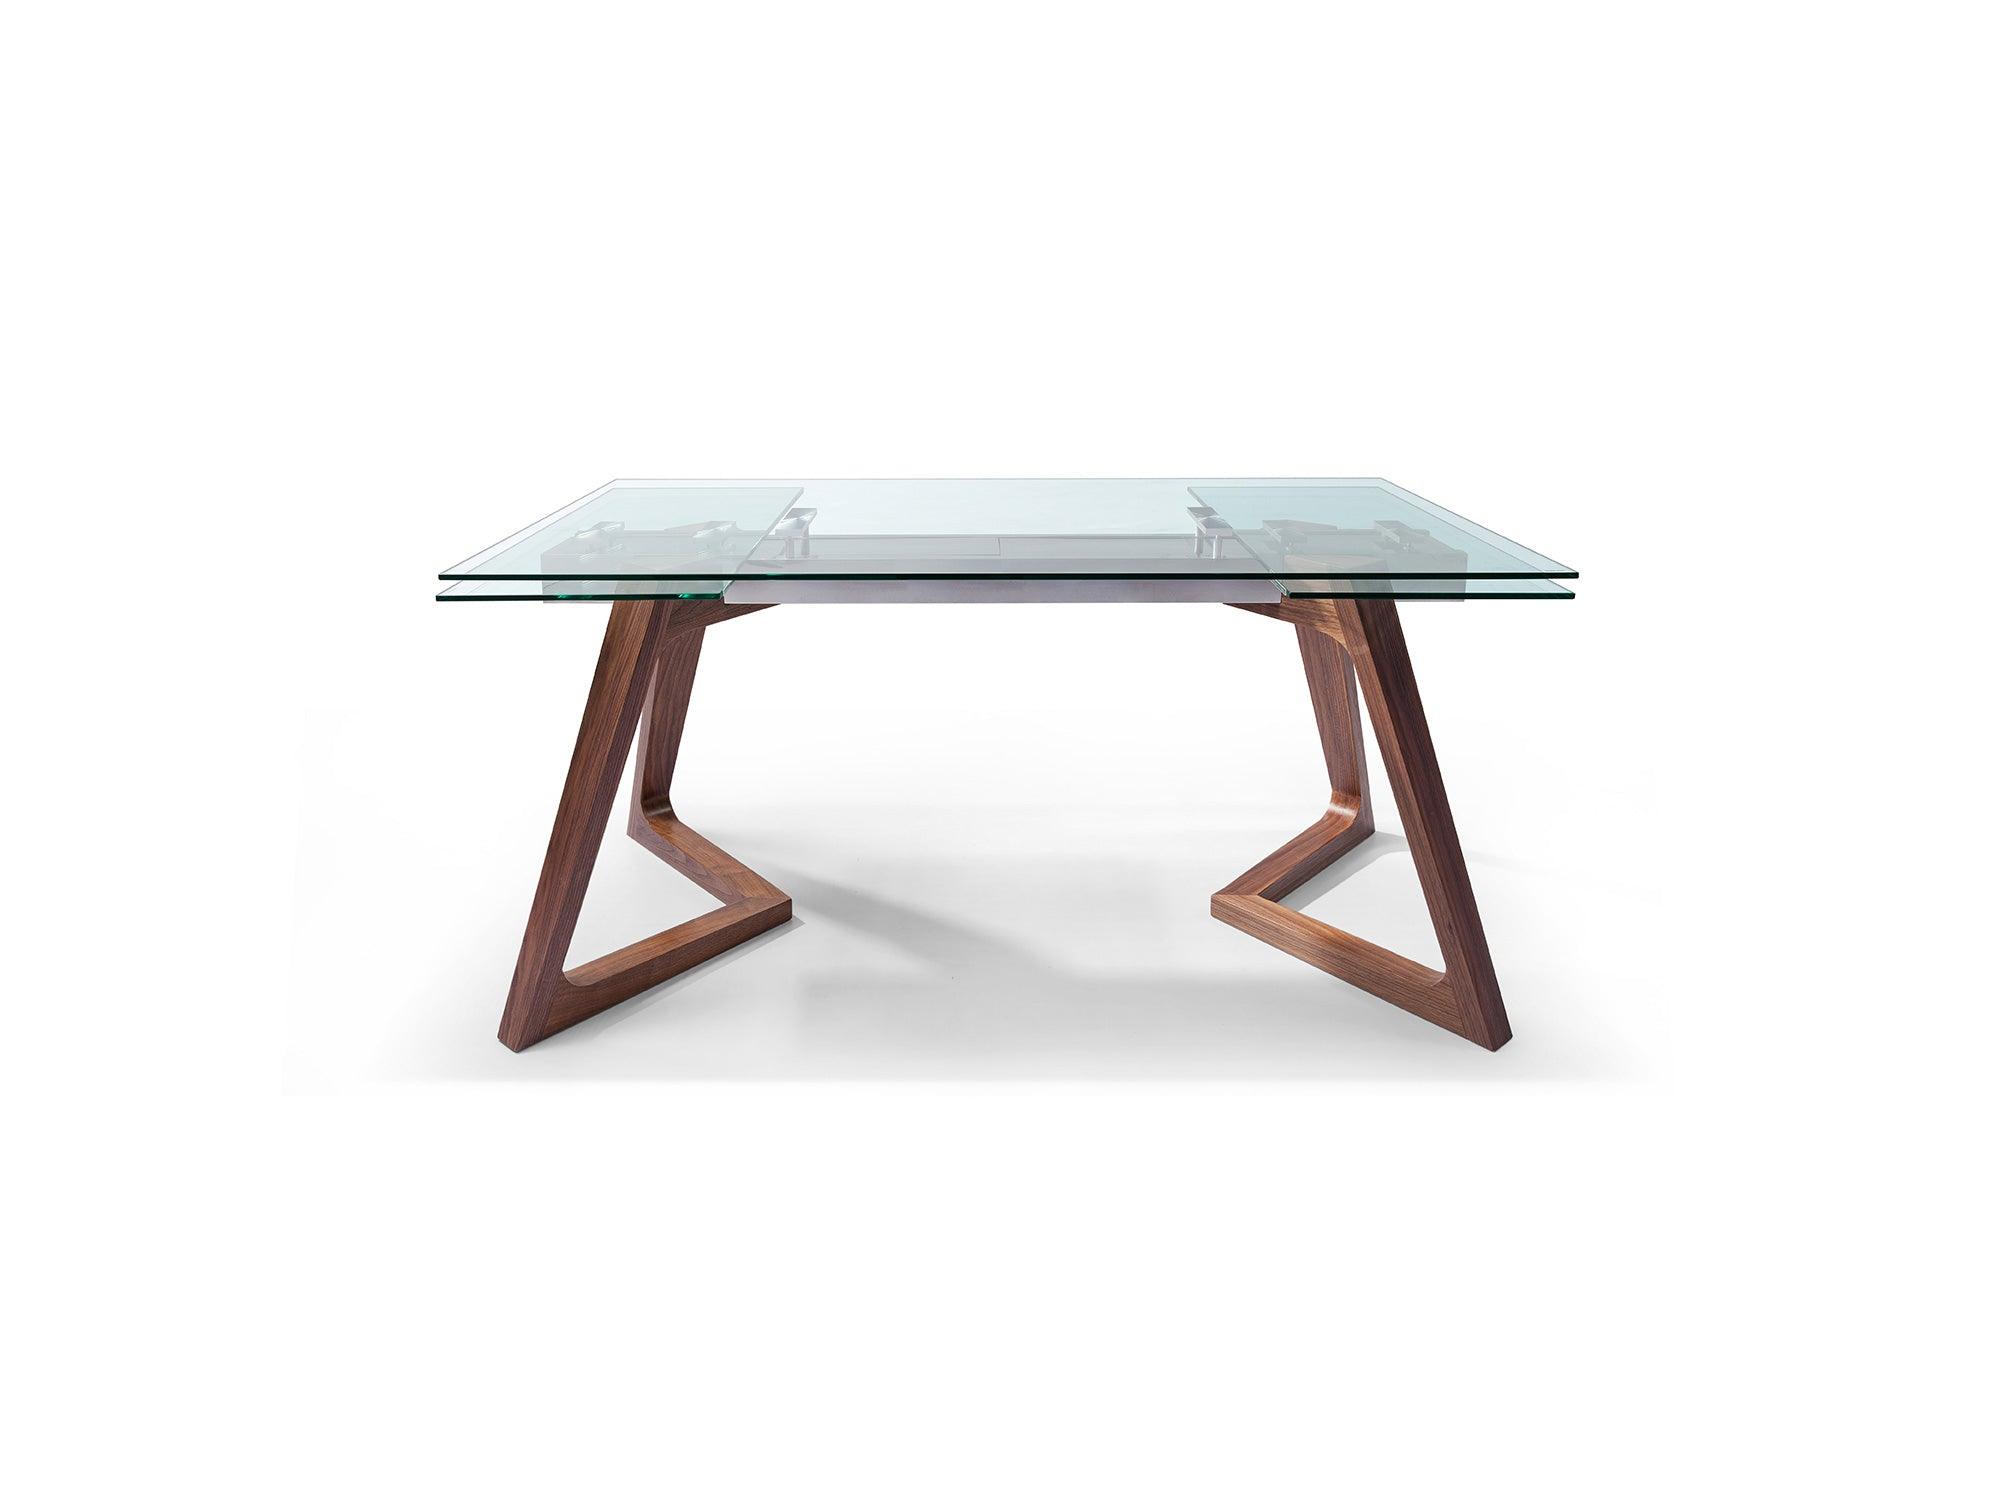 Brewer Extendable Dining Table Walnut - Euro Living Furniture